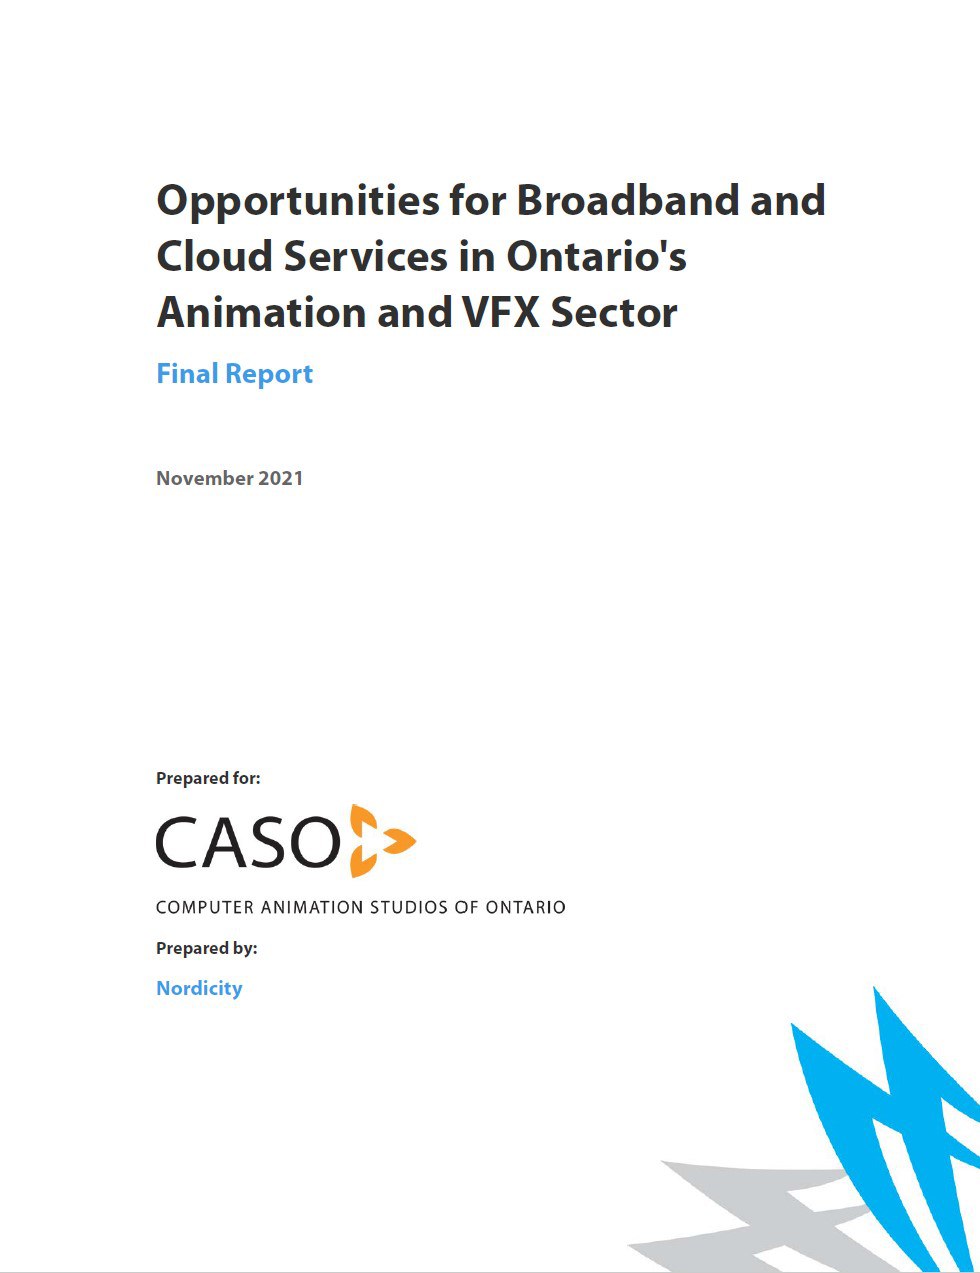 Opportunities for Broadband and Cloud Services in Ontario's Animation and VFX Sector